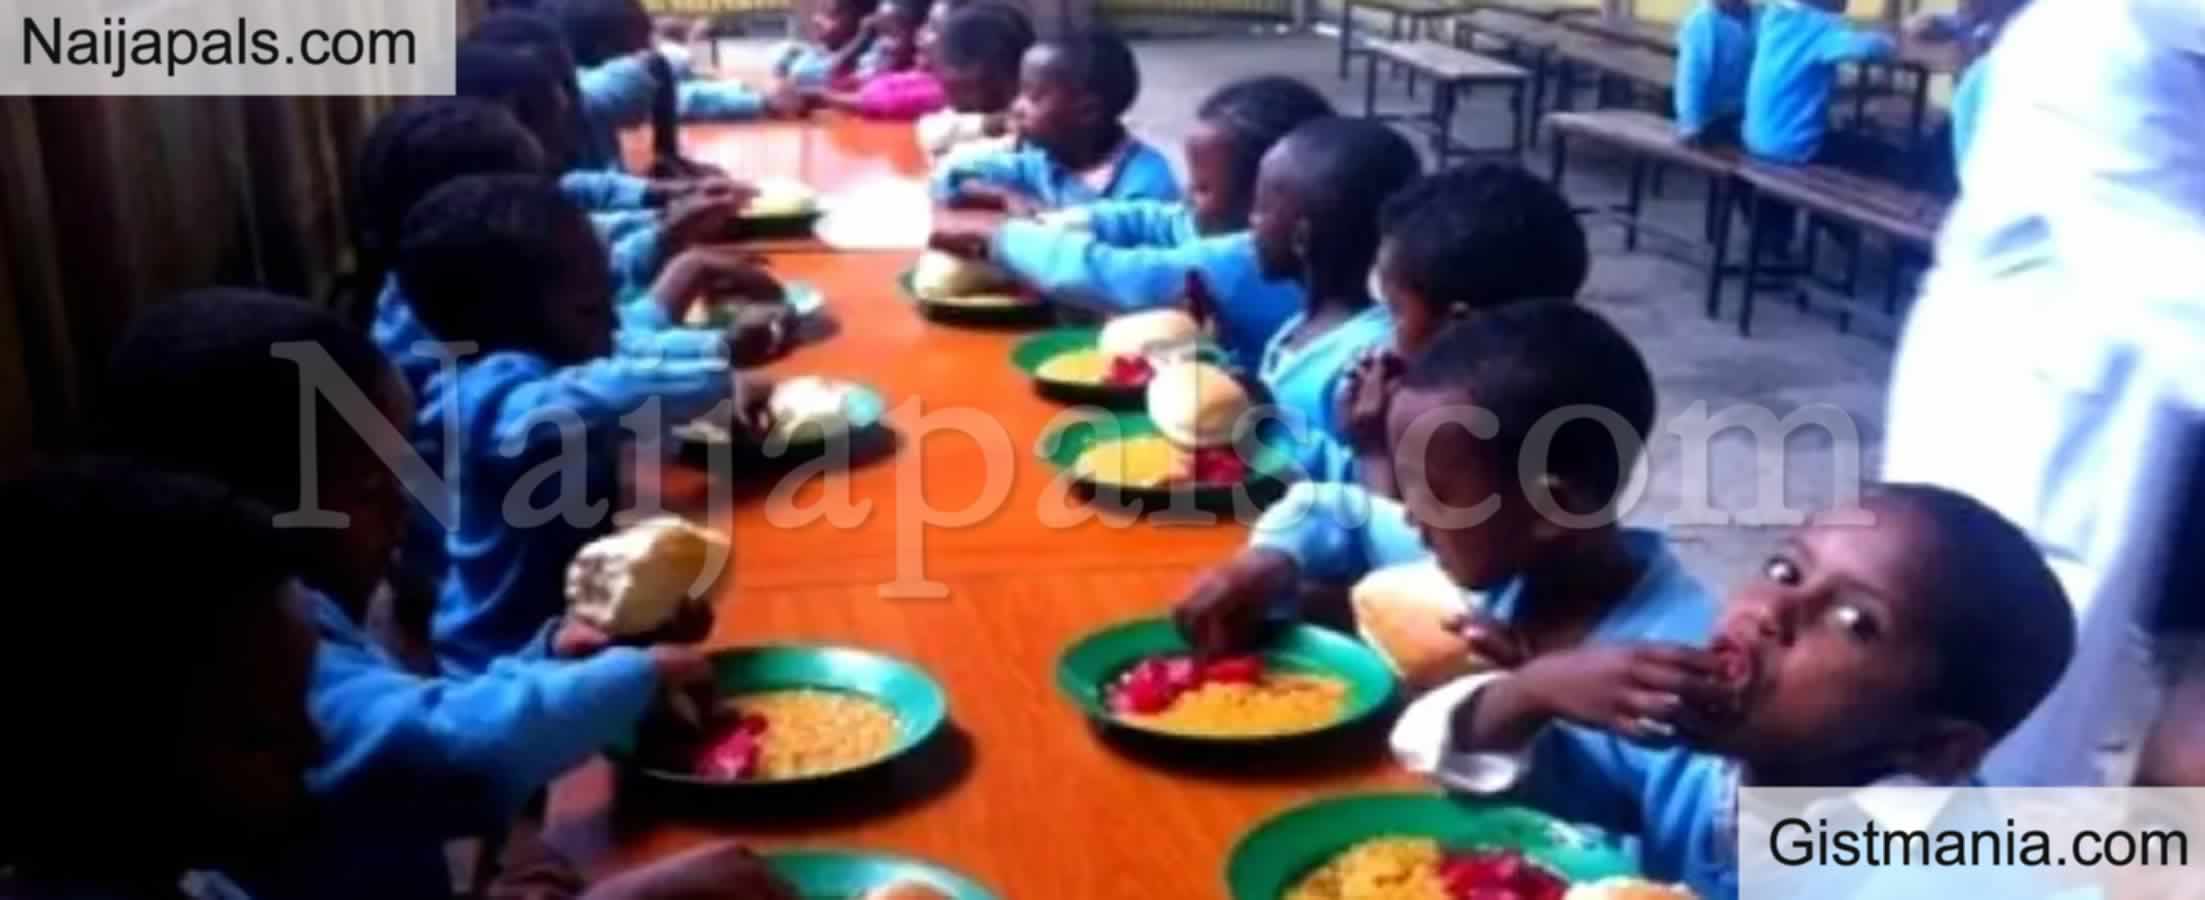 <img alt='.' class='lazyload' data-src='https://img.gistmania.com/emot/news.gif' /><b> Federal Government To Spend 999 Million Naira Daily To Feed 10 Million Pupils</b>